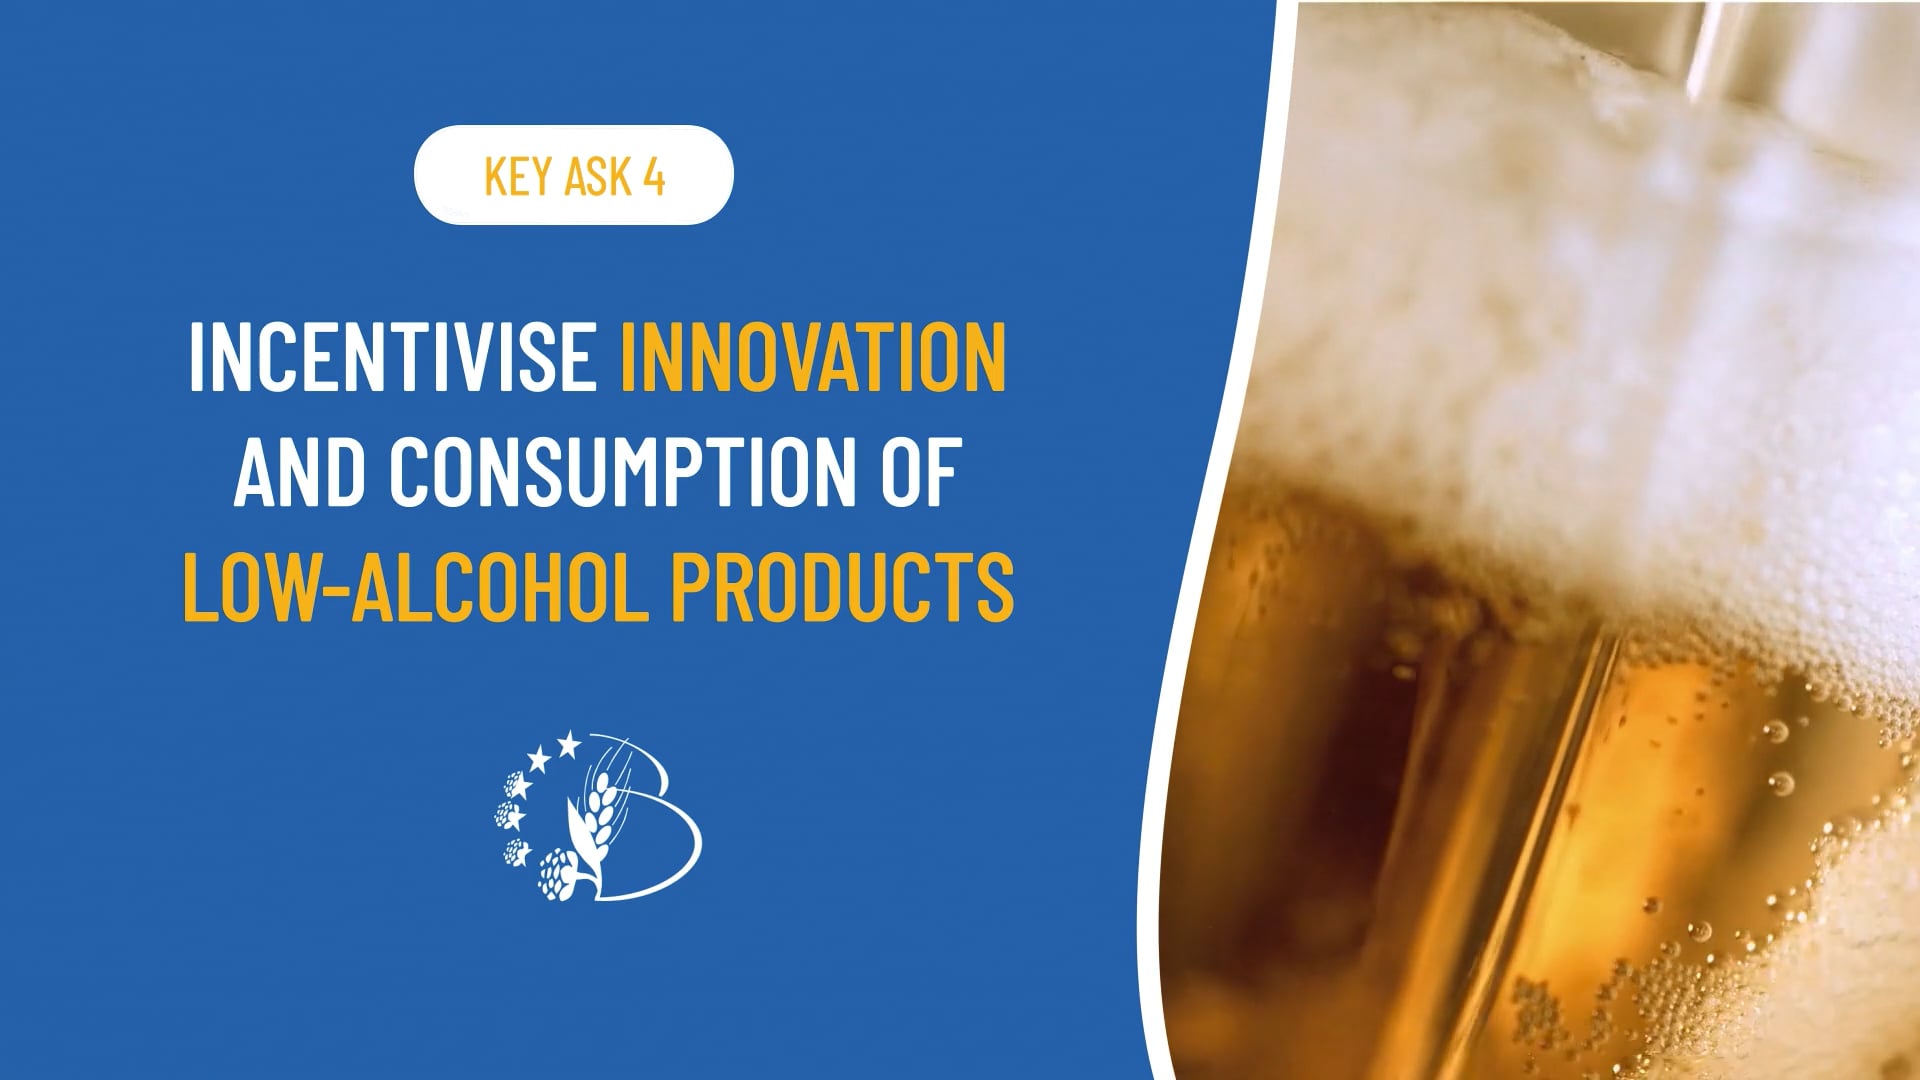 ASK #4 - INCENTIVISE INNOVATION AND CONSUMPTION OF LOW-ALCOHOL PRODUCTS